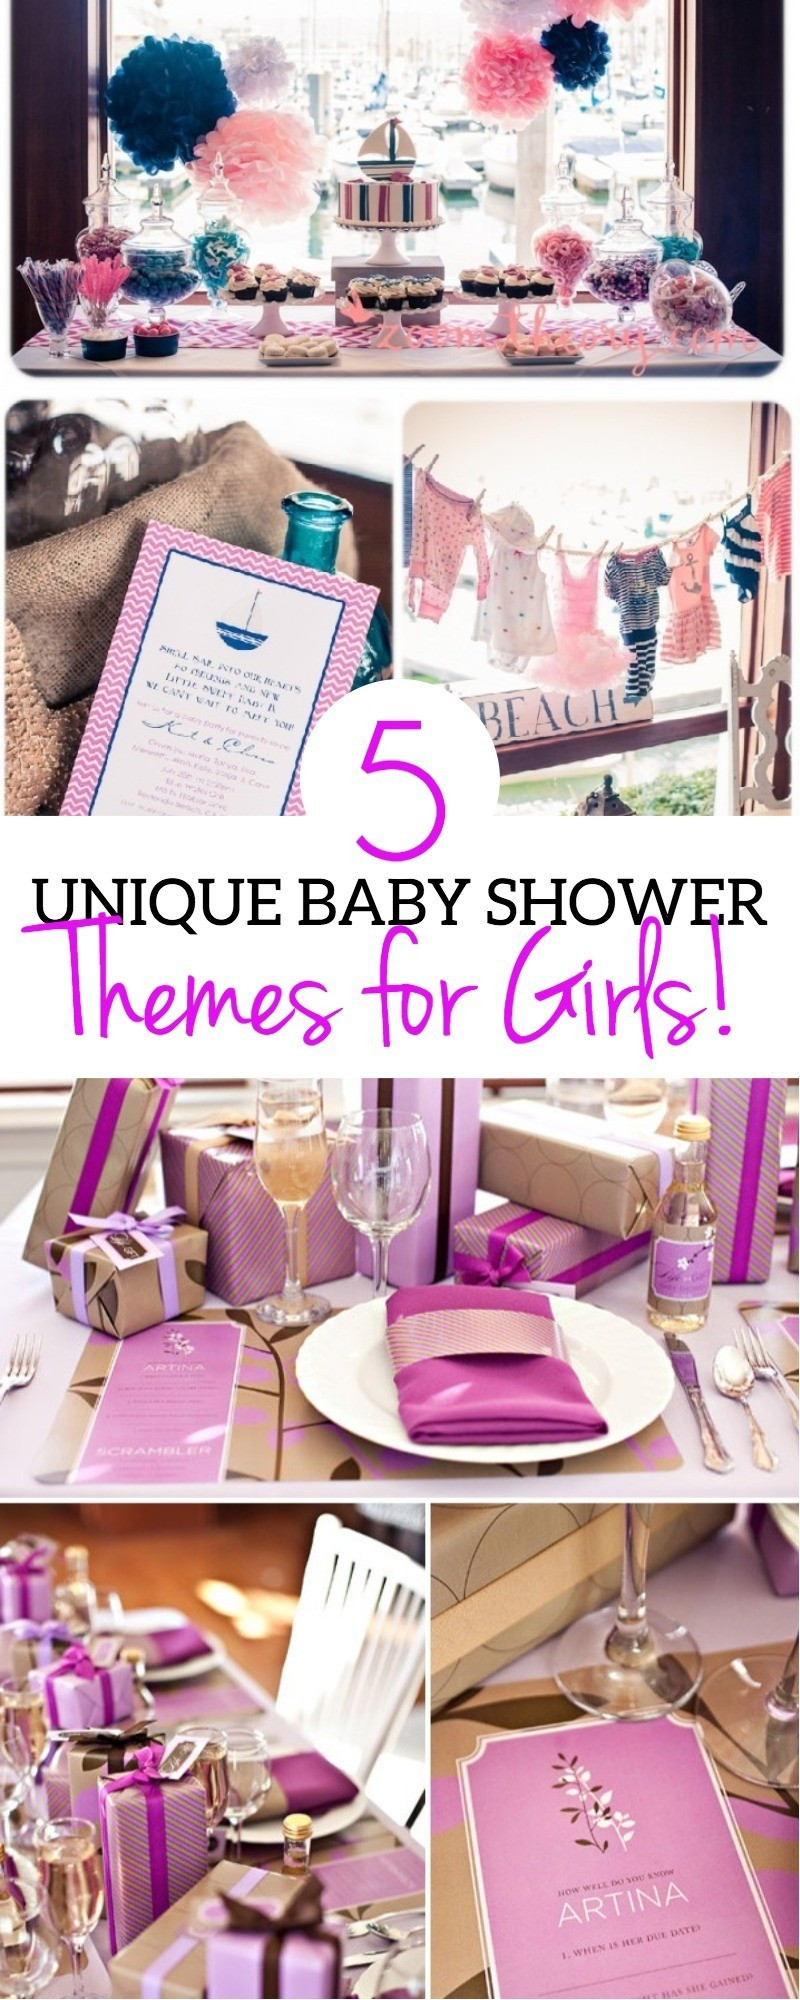 Unique Baby Shower Decor
 5 Unique Baby Shower Ideas For Girls We Love These Cute